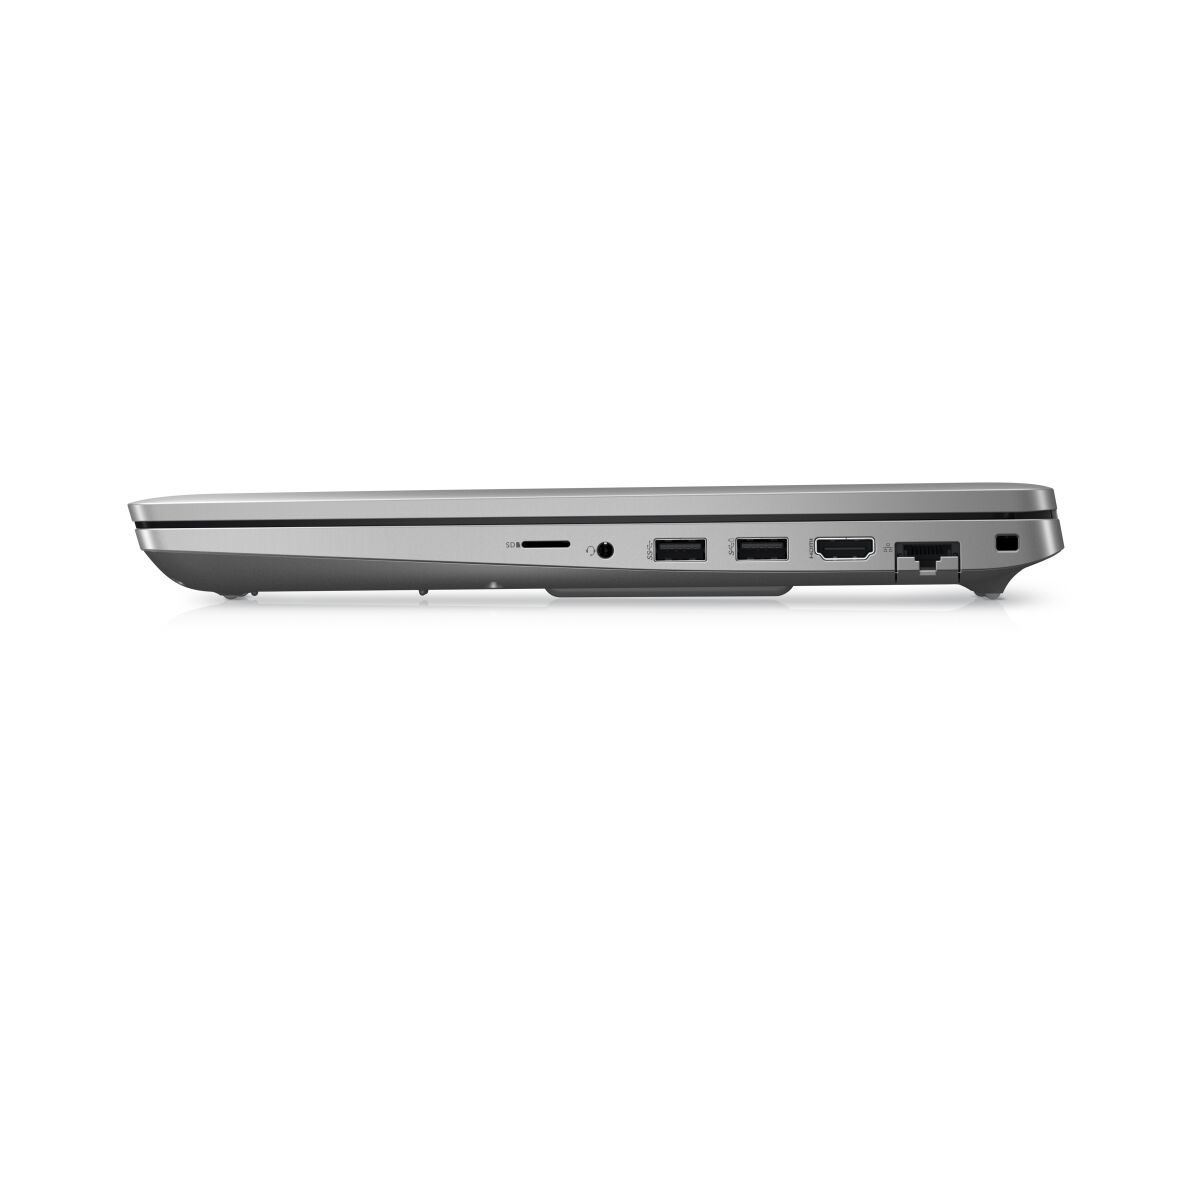 DELL Latitude 5521 - S007L552115US laptop specifications